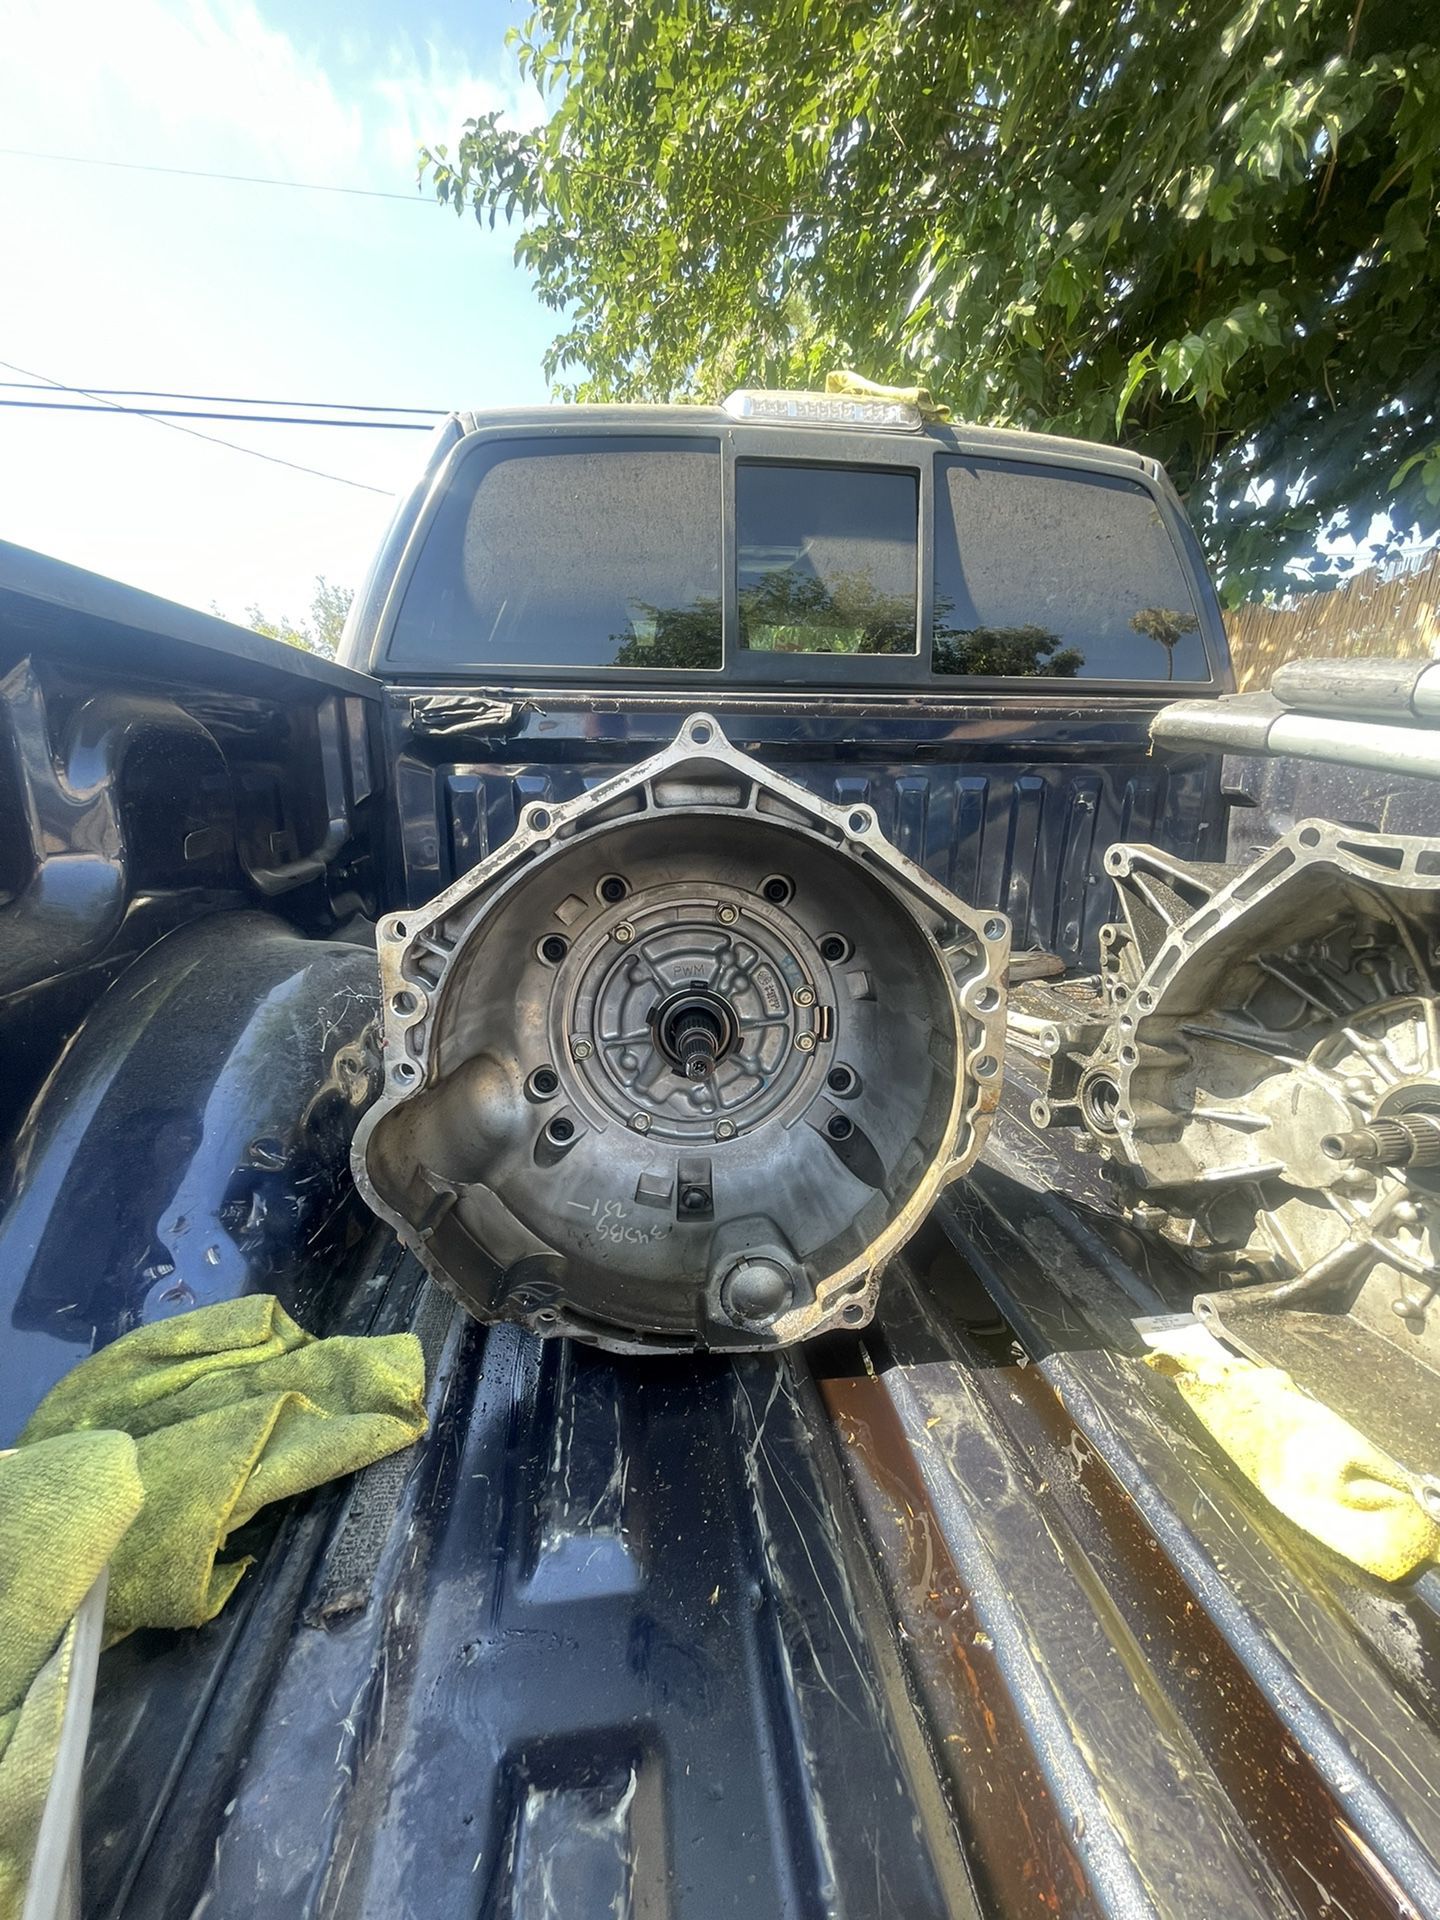 07 Chevy Silverado Transmission 460le 90,000 Miles My Truck Was Totaled Ran Perfect 